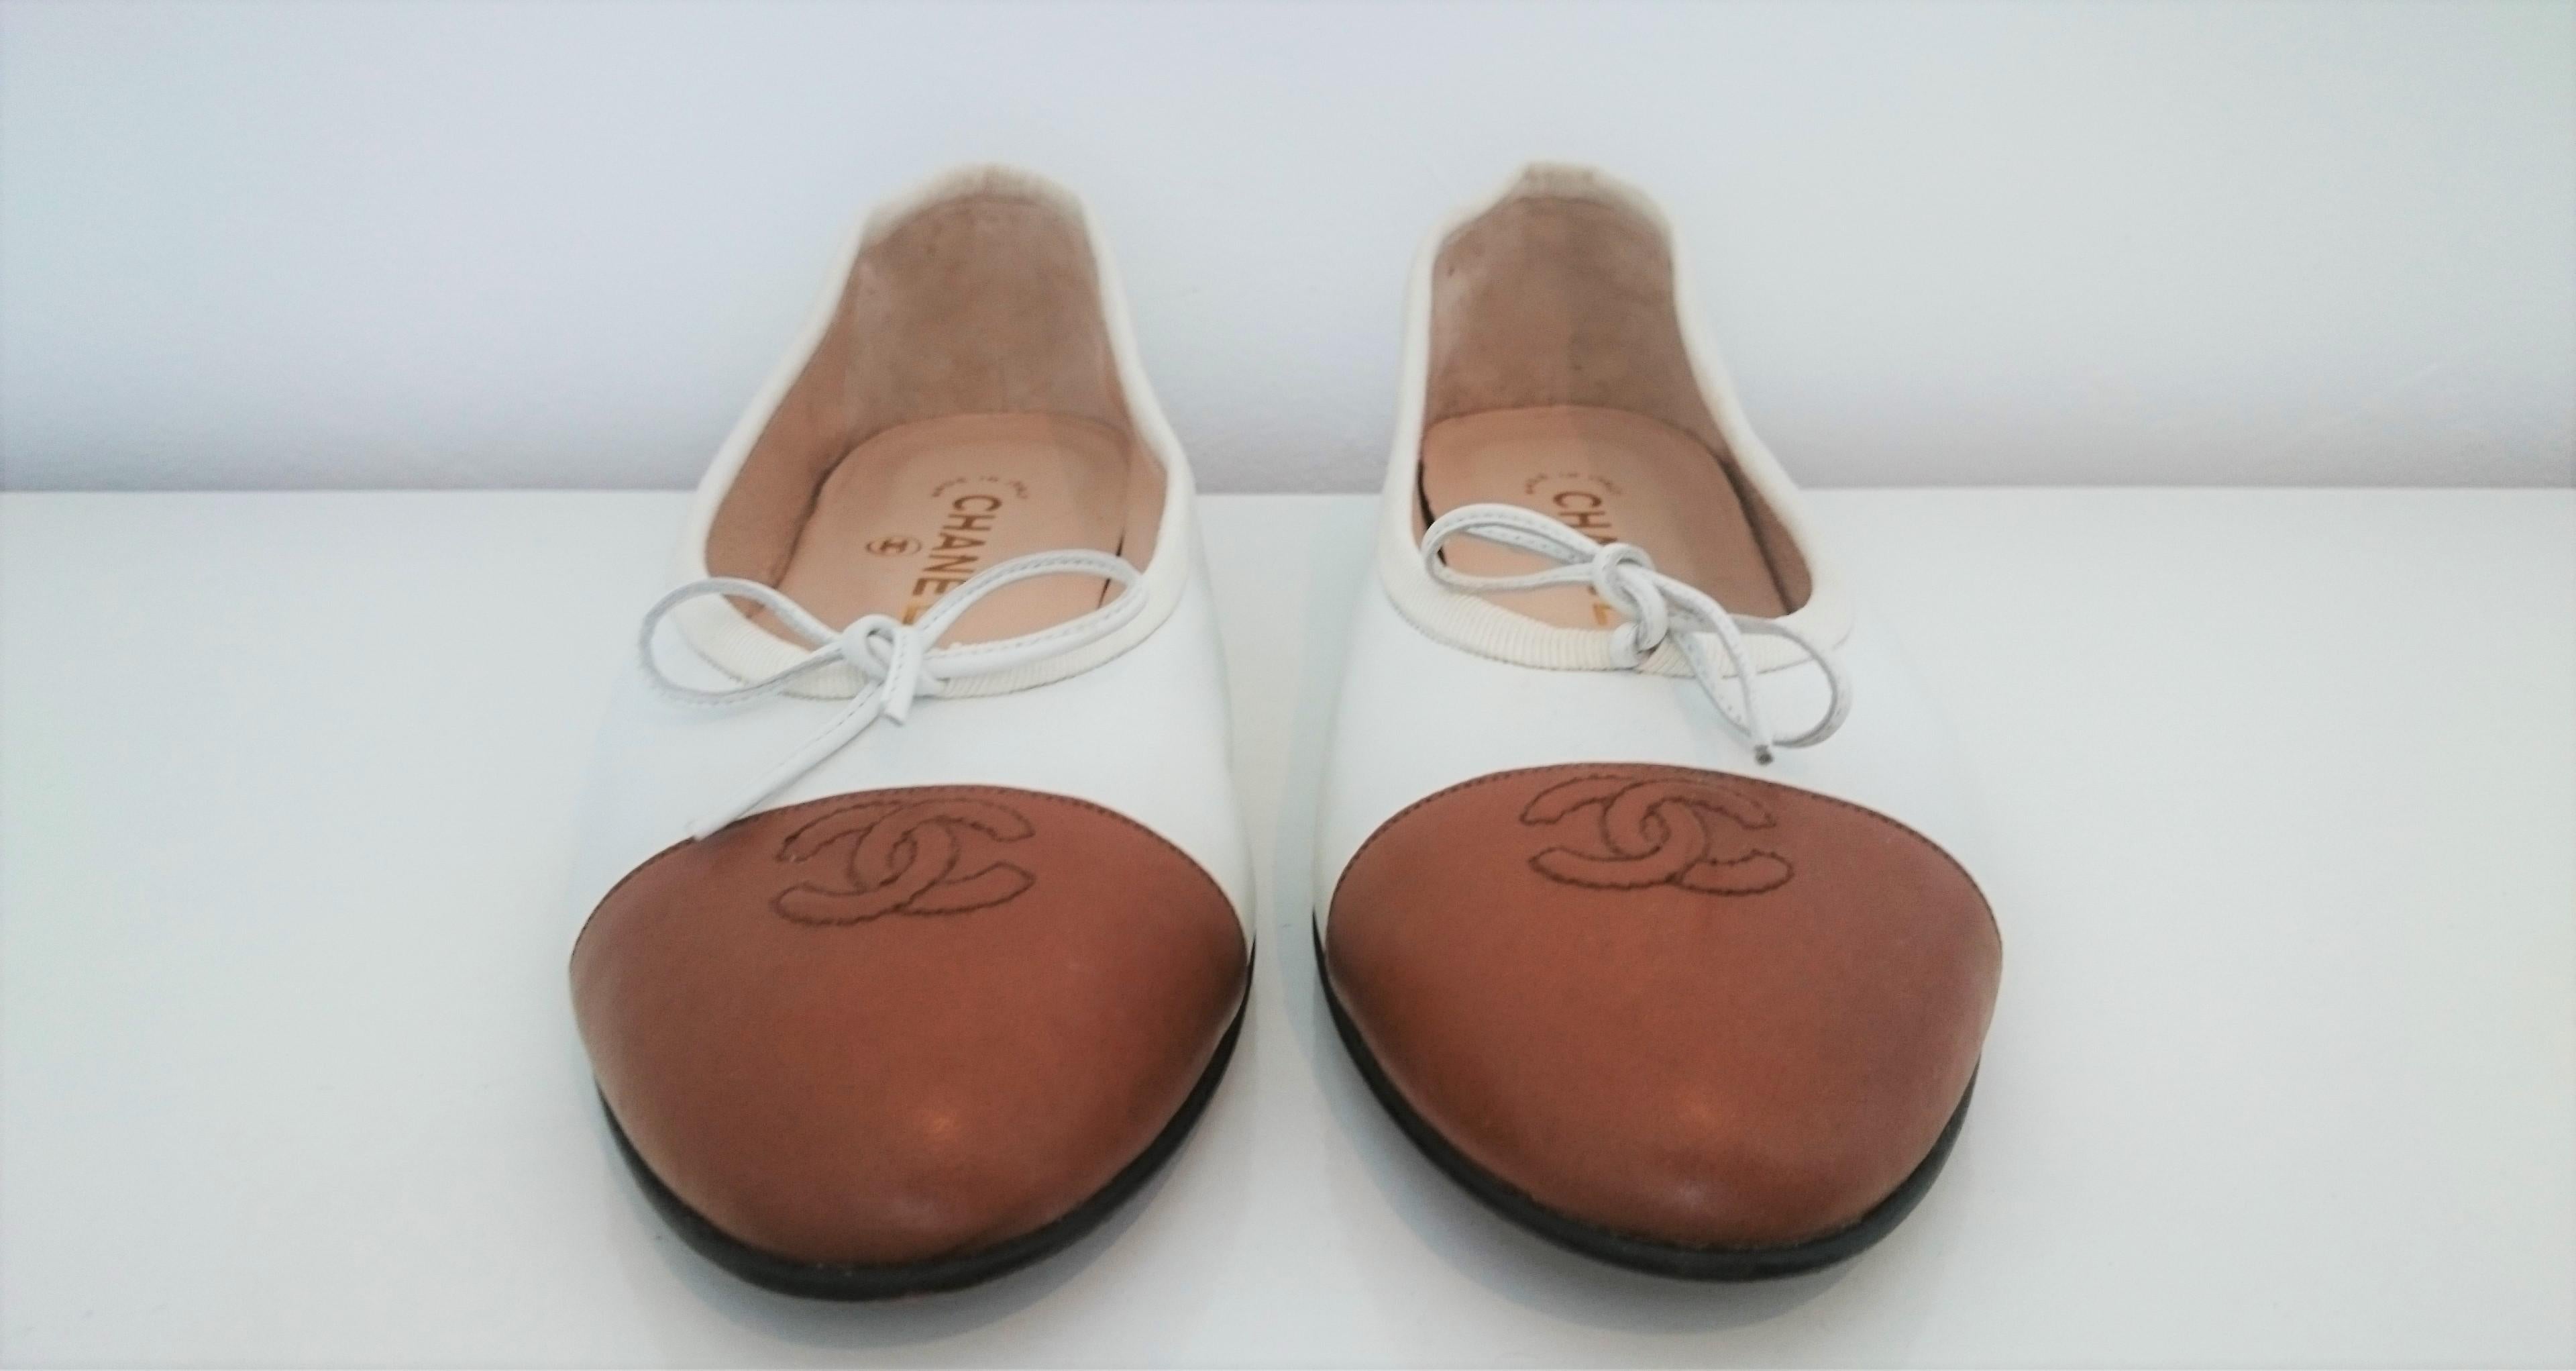 Chanel Leather Bicolor Ballerina Ballet Flats 
Colors: White and Brown-Caramel
NEW, never used.
Size 40 1/2
Original dustbag not included.
Made in Italy